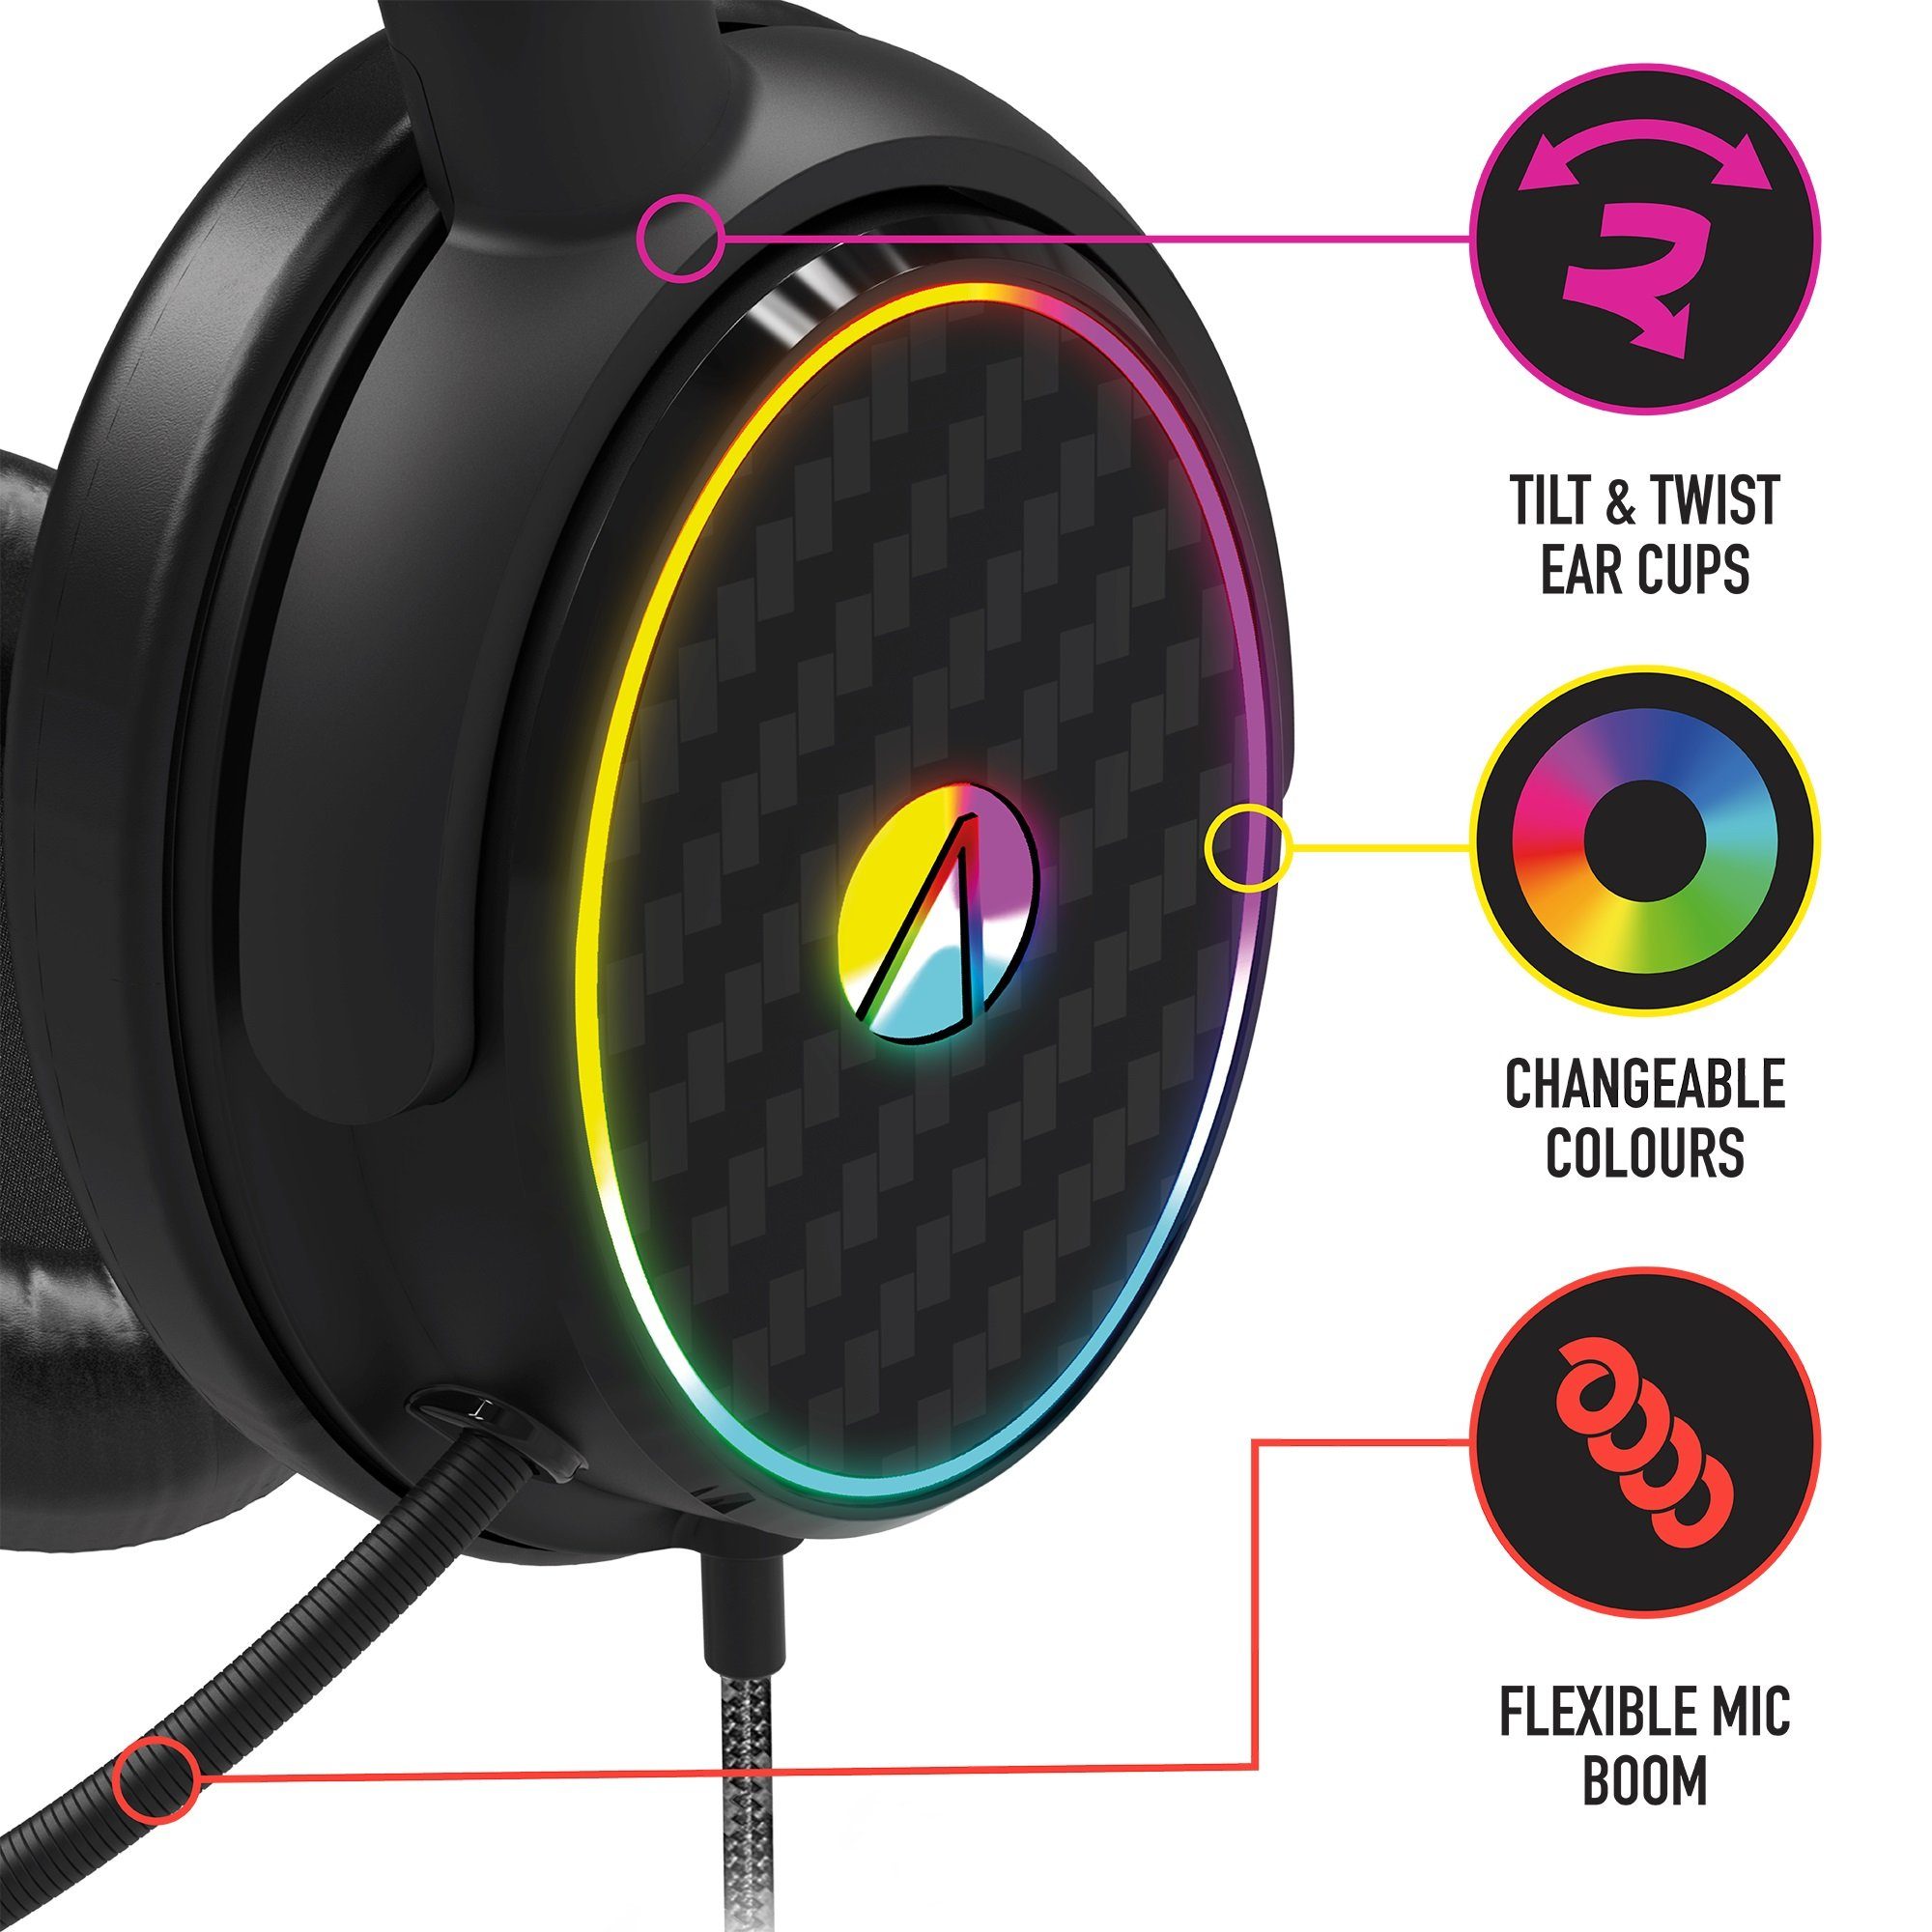 Gaming-Headset C6-100 LED mit Beleuchtung Gaming Headset Stealth Stereo Verpackung) (Plastikfreie